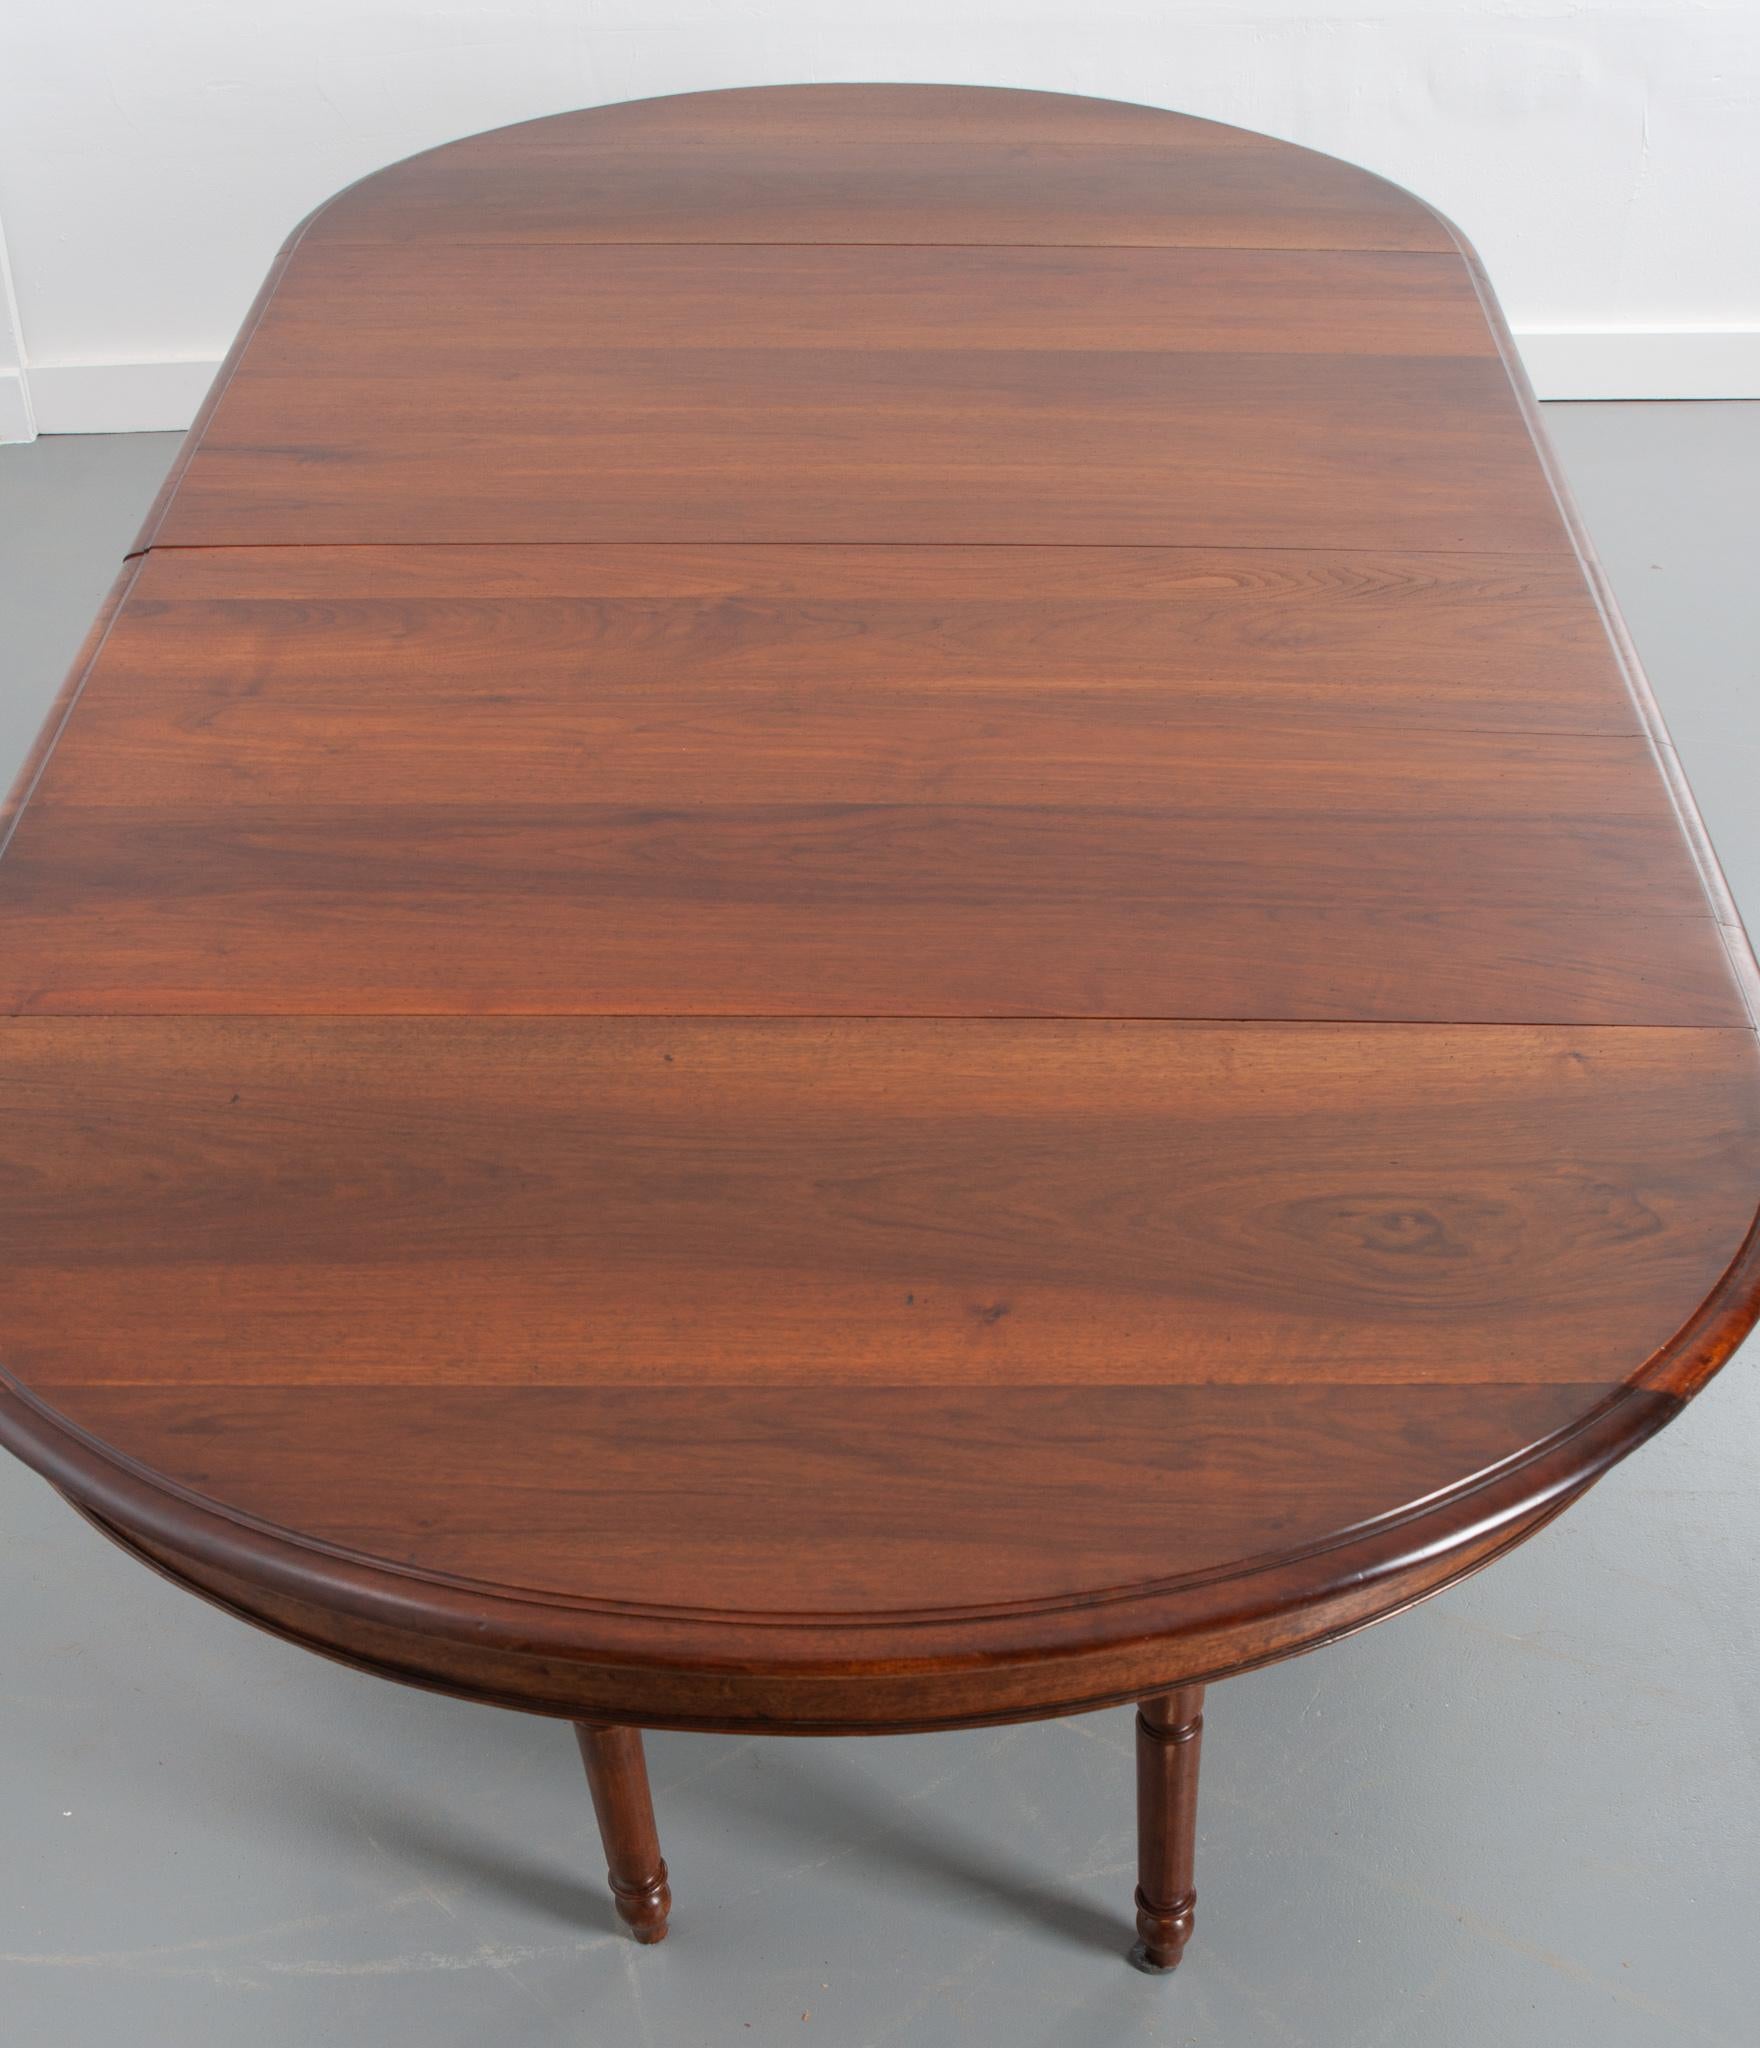 A stately French walnut oval extension table, circa late 1800s. It has two new custom leaves that convert the table from a small oval to massive table fit for a feast. The top sits over a simple apron raised on a massive reeded column pedestal with